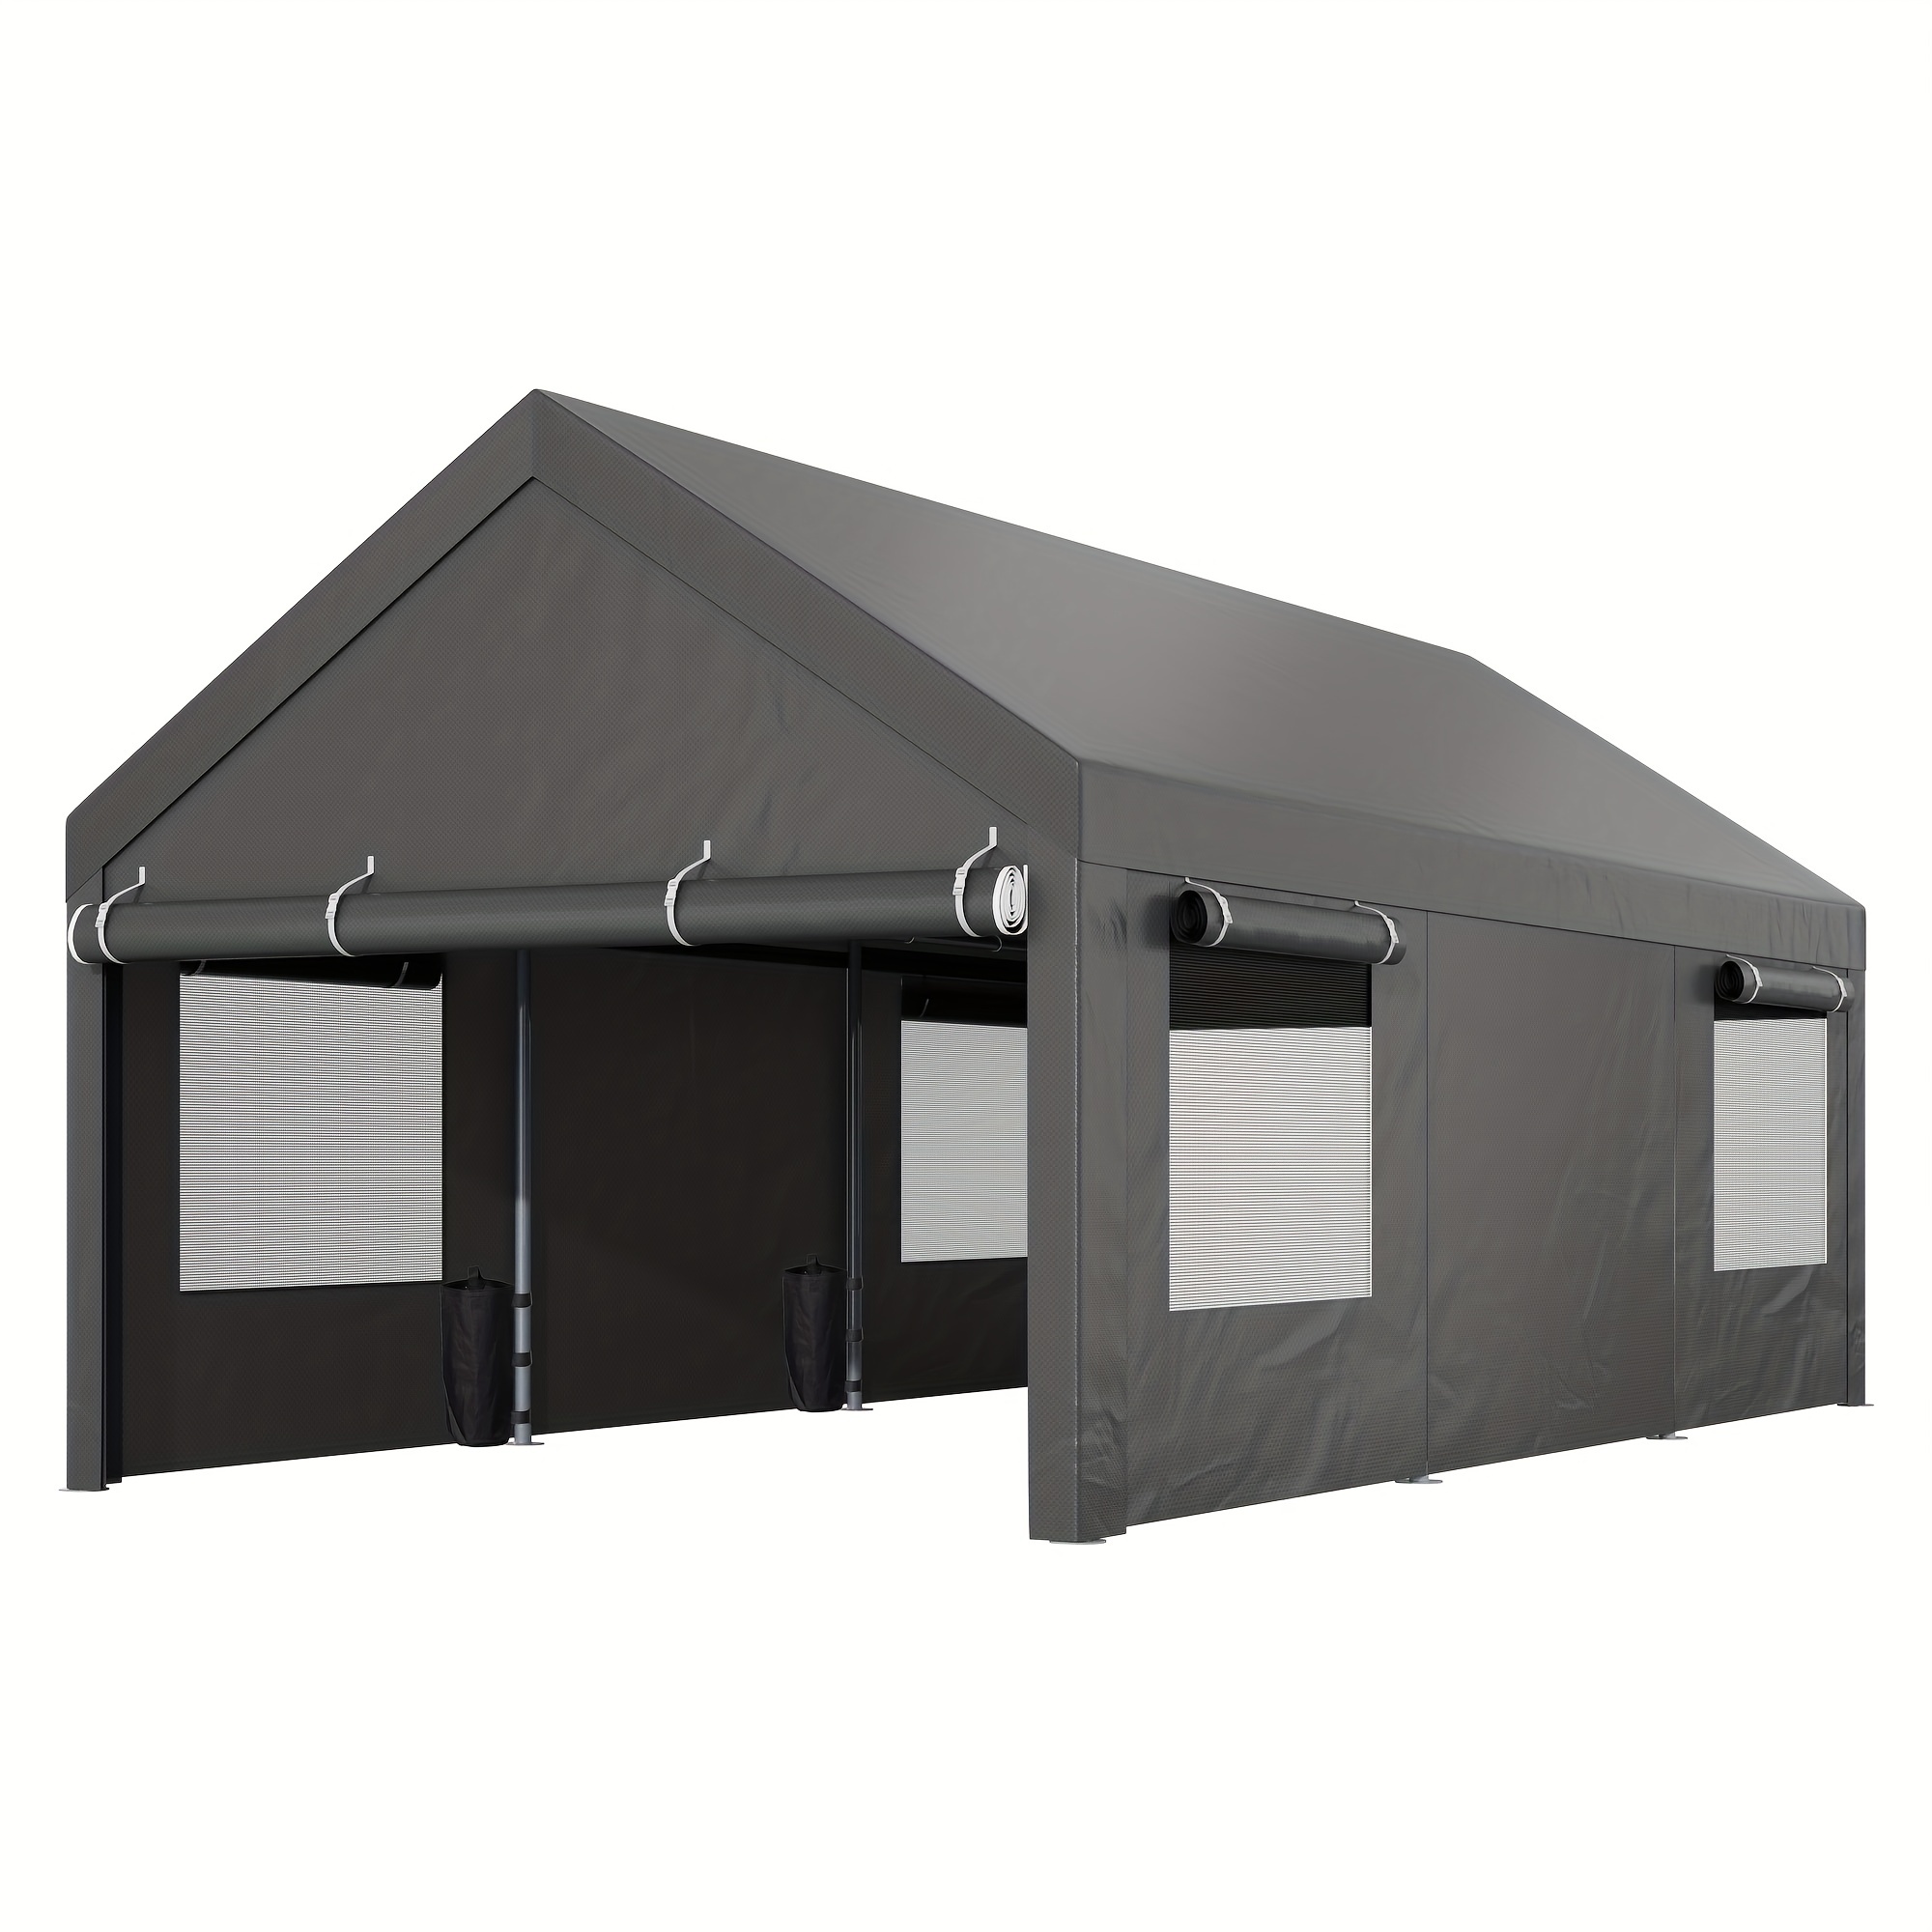 

Jamfly 10x20ft/12x20ft Heavy Duty Carport With Sandbag, Portable Garage With Removable Sidewalls, Doors And Ventilated Windows, Uv Resistant Waterproof Carport Canopy For Outdoor